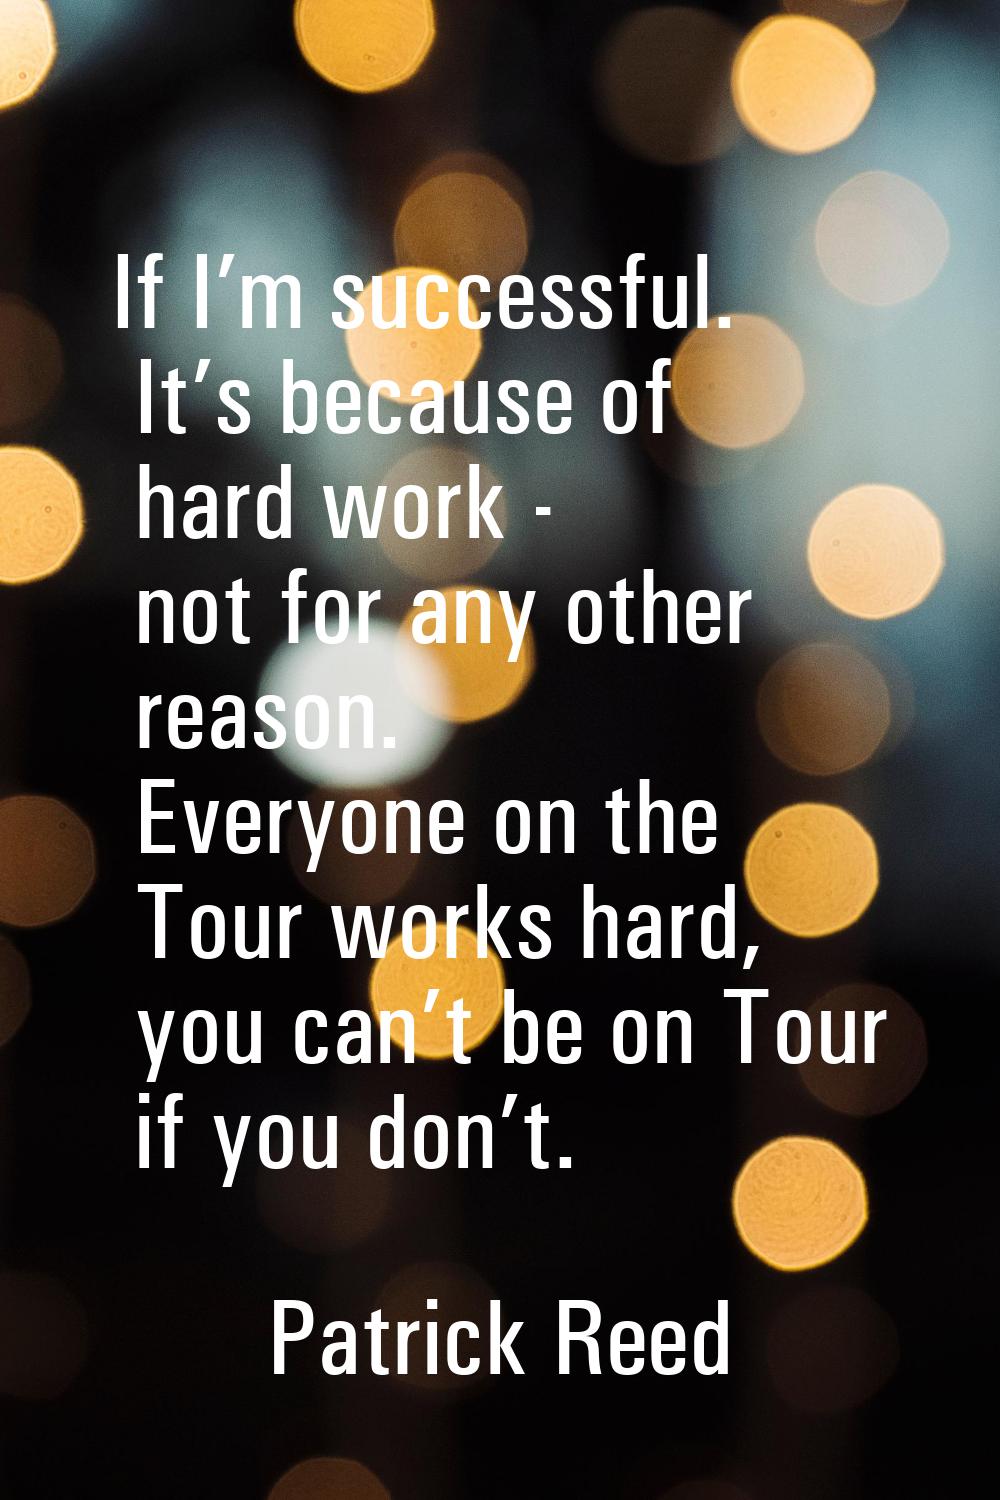 If I’m successful. It’s because of hard work - not for any other reason. Everyone on the Tour works